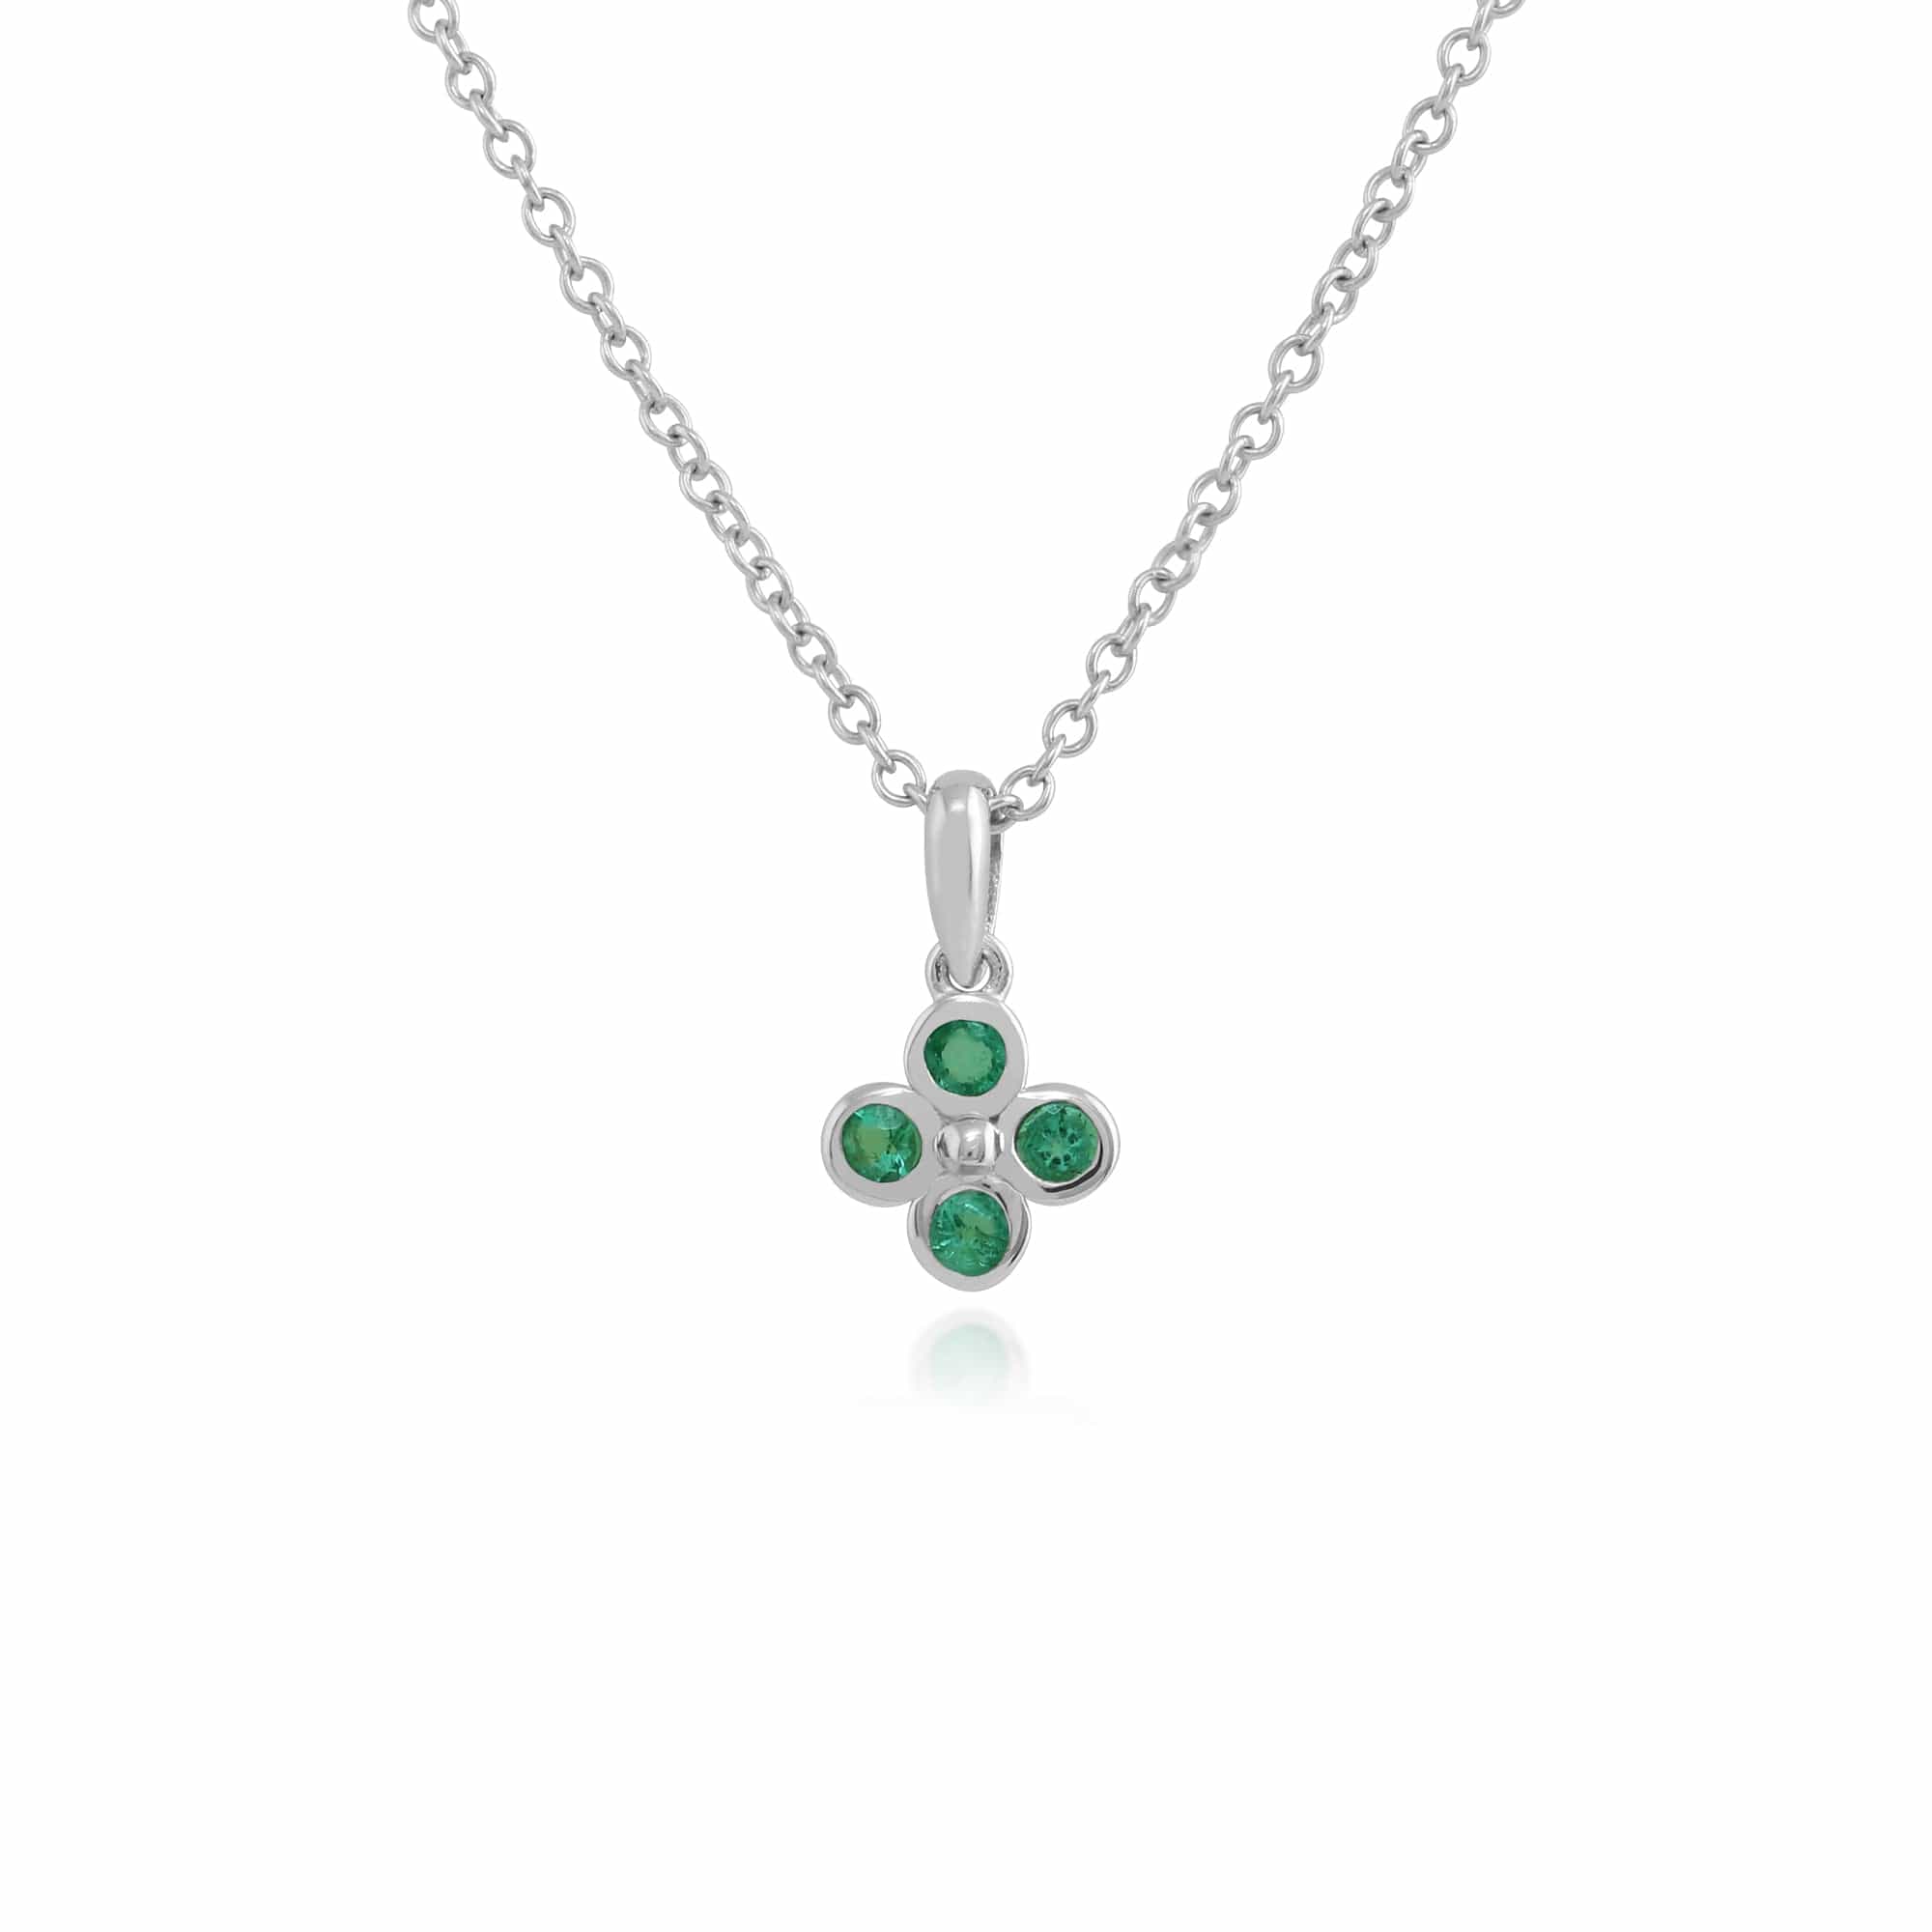 Floral Round Emerald Clover Stud Earrings & Pendant Set in 925 Sterling Silver - Gemondo